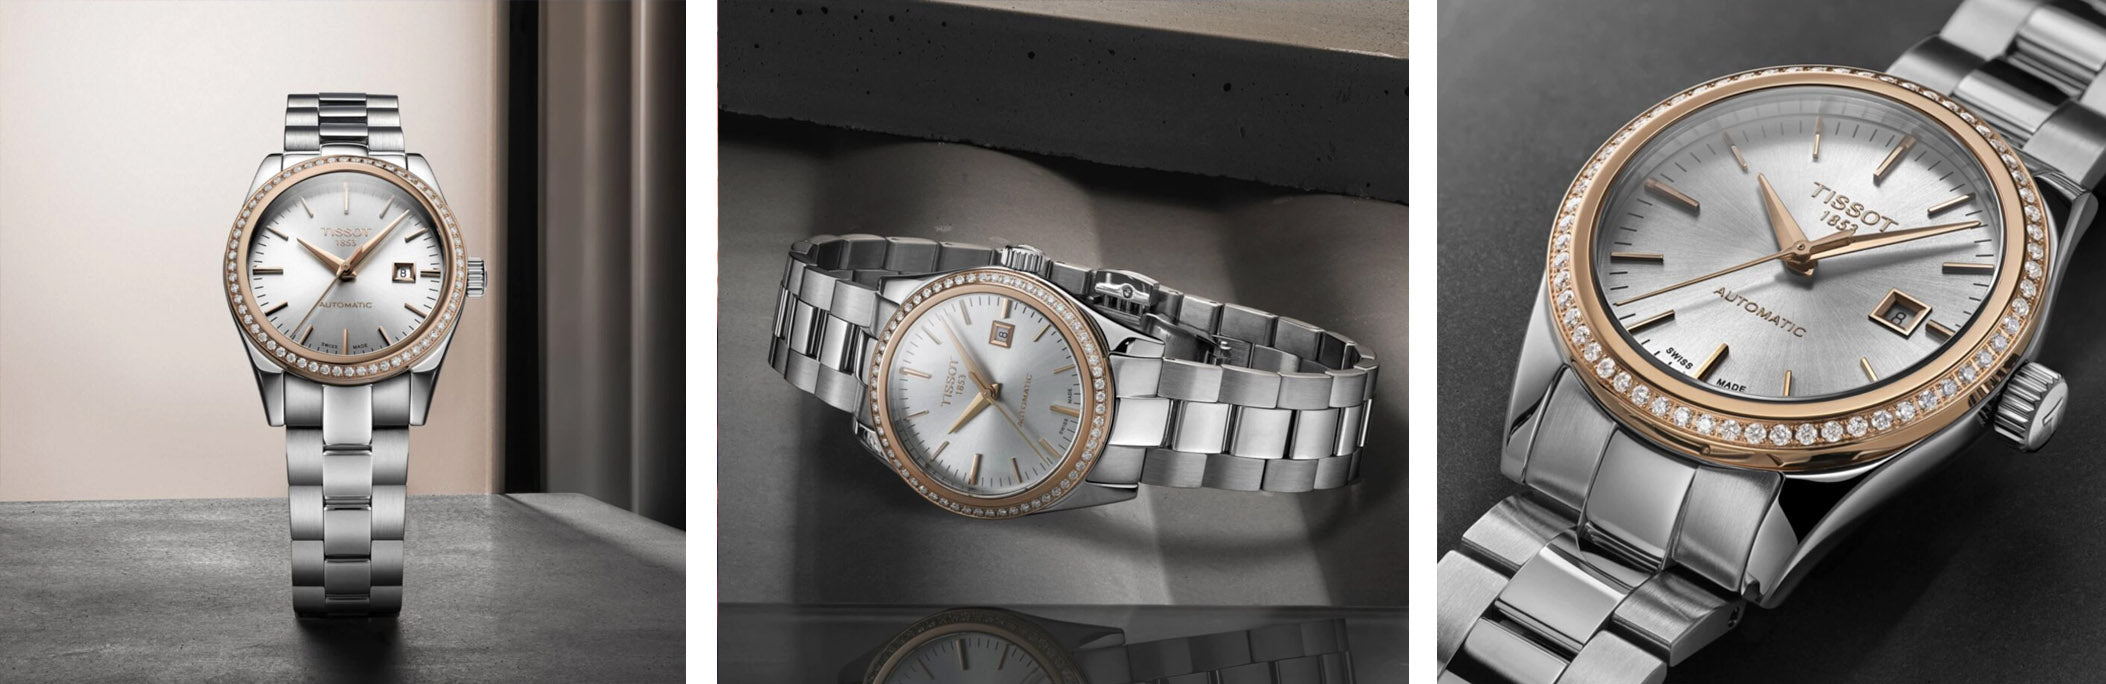 Tissot Lady Collection at Deacons Jewellers Swindon